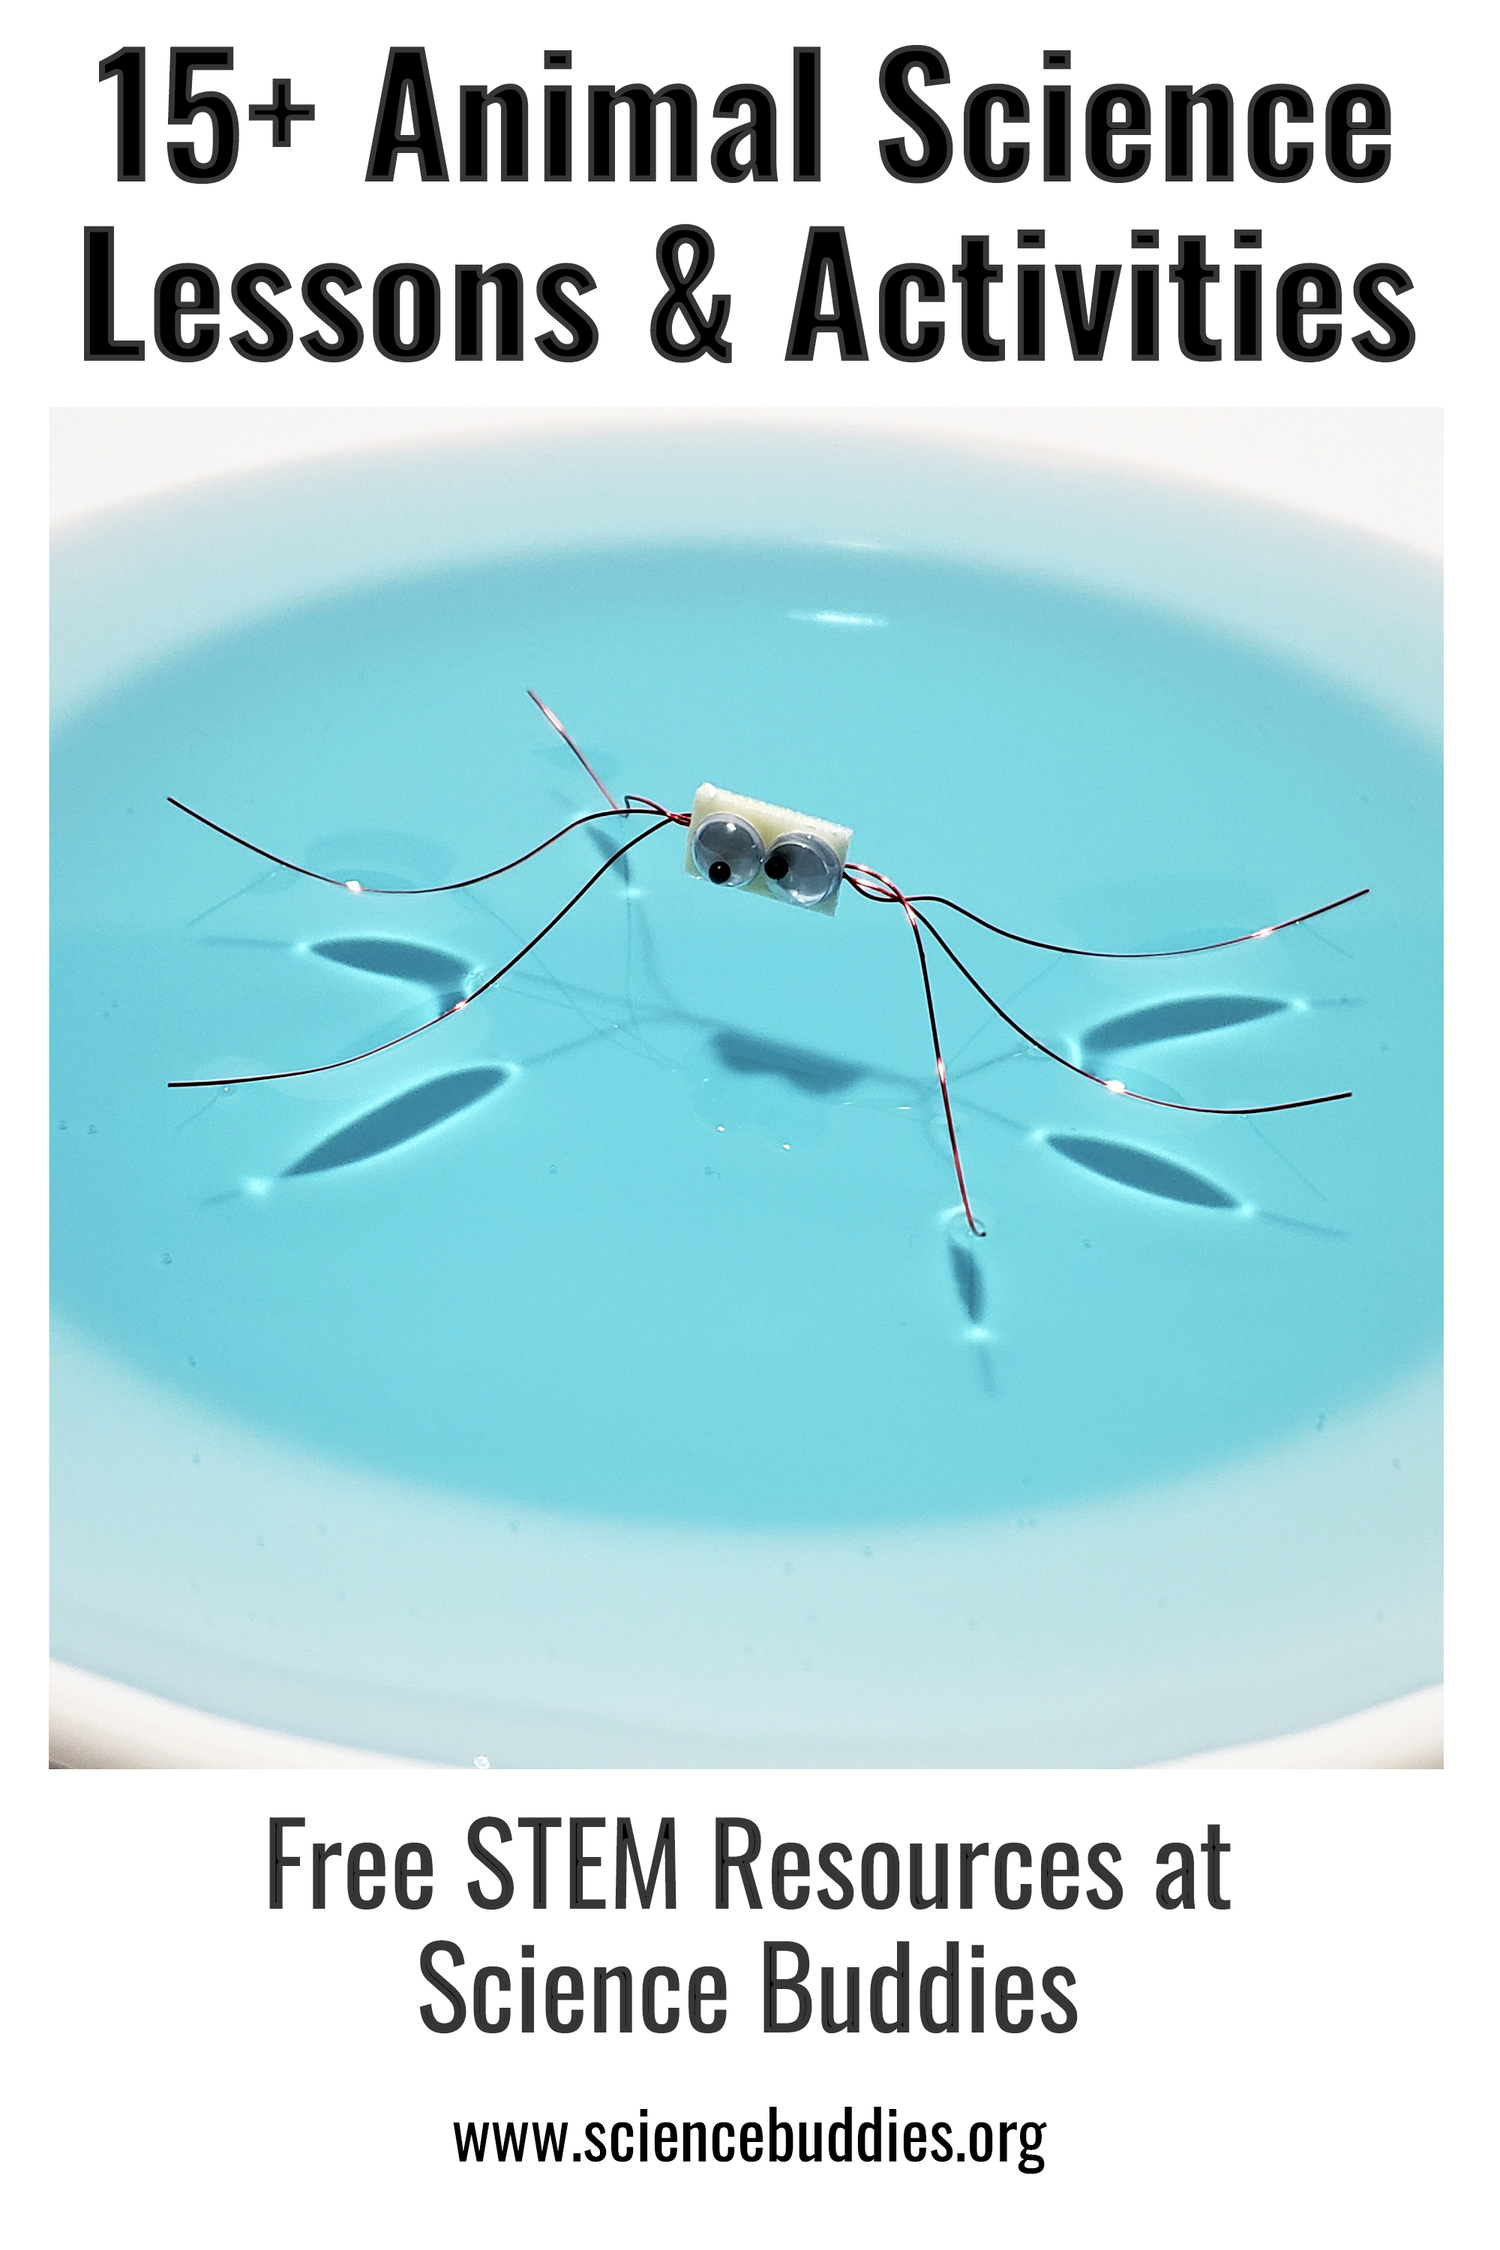 Water strider made from wire standing on a dish of water - from lesson on animal science